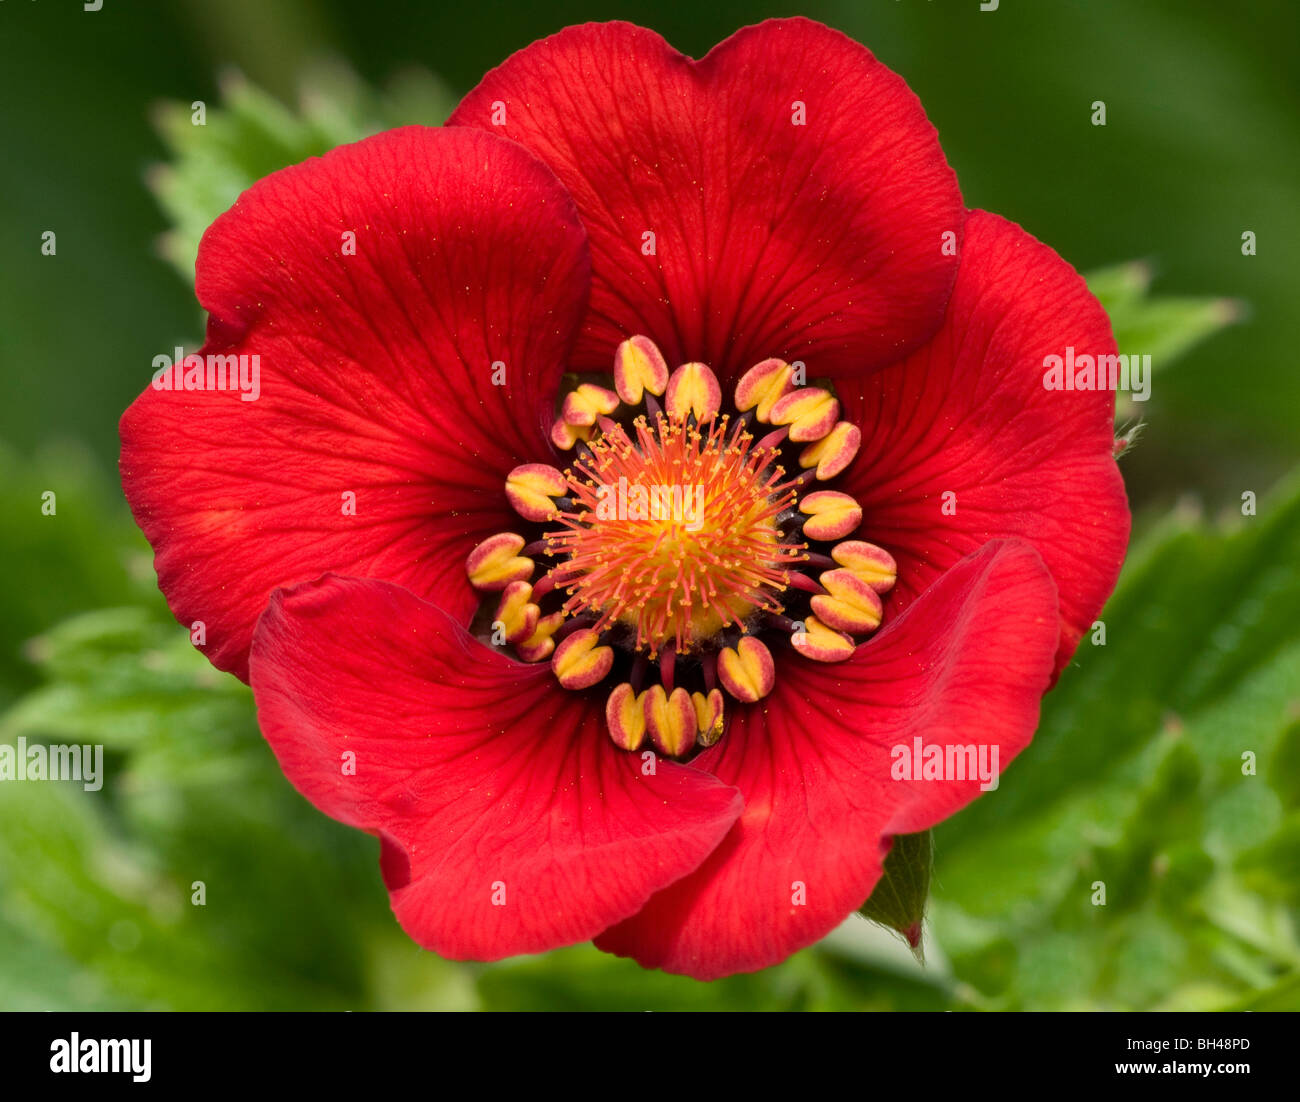 Potentilla 'Gibson's scarlet'. Close up image of single flower. Stock Photo